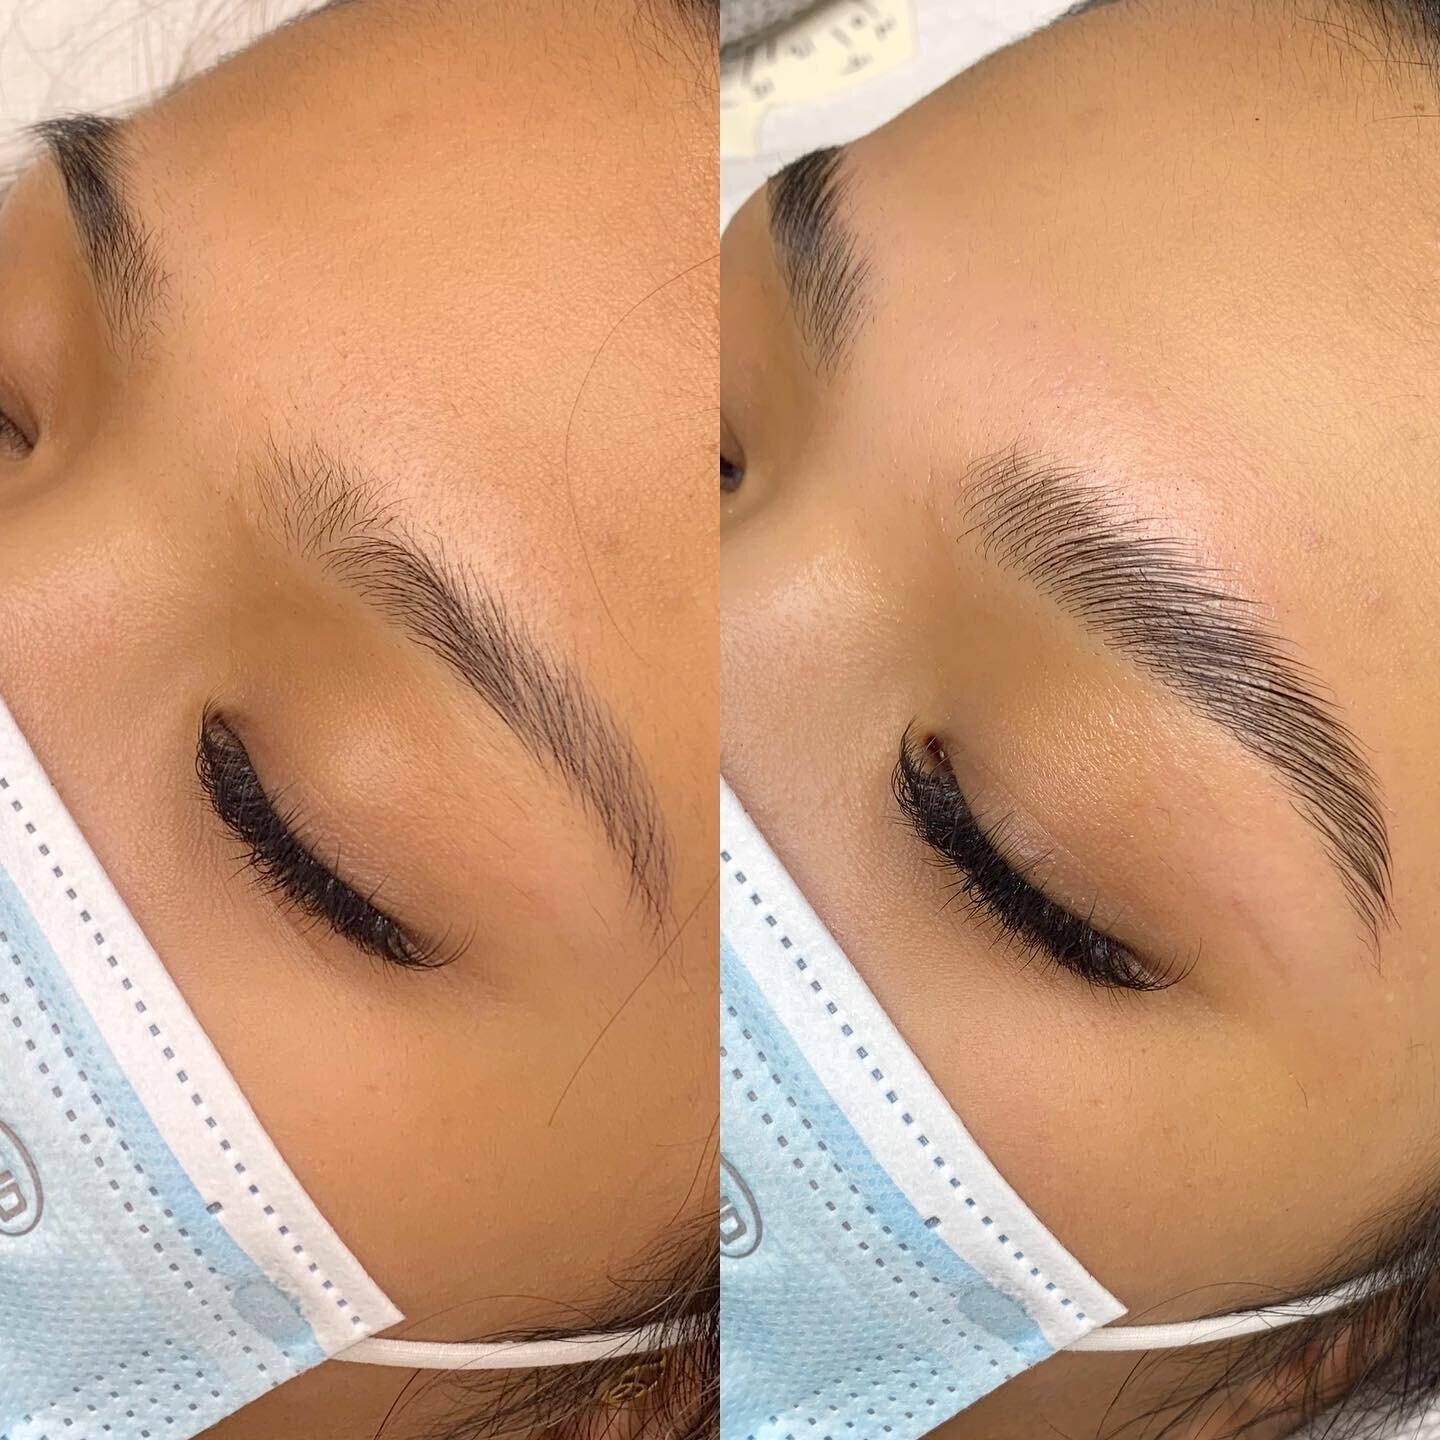 Fluffy brows are just an appointment away 🤩 swipe ⇾ for after video 😍
&mdash;&mdash;
Always accepting new brow clients 🤍 Brow Lami comes with a free aftercare kit! Lasts anywhere from 4-8 weeks.